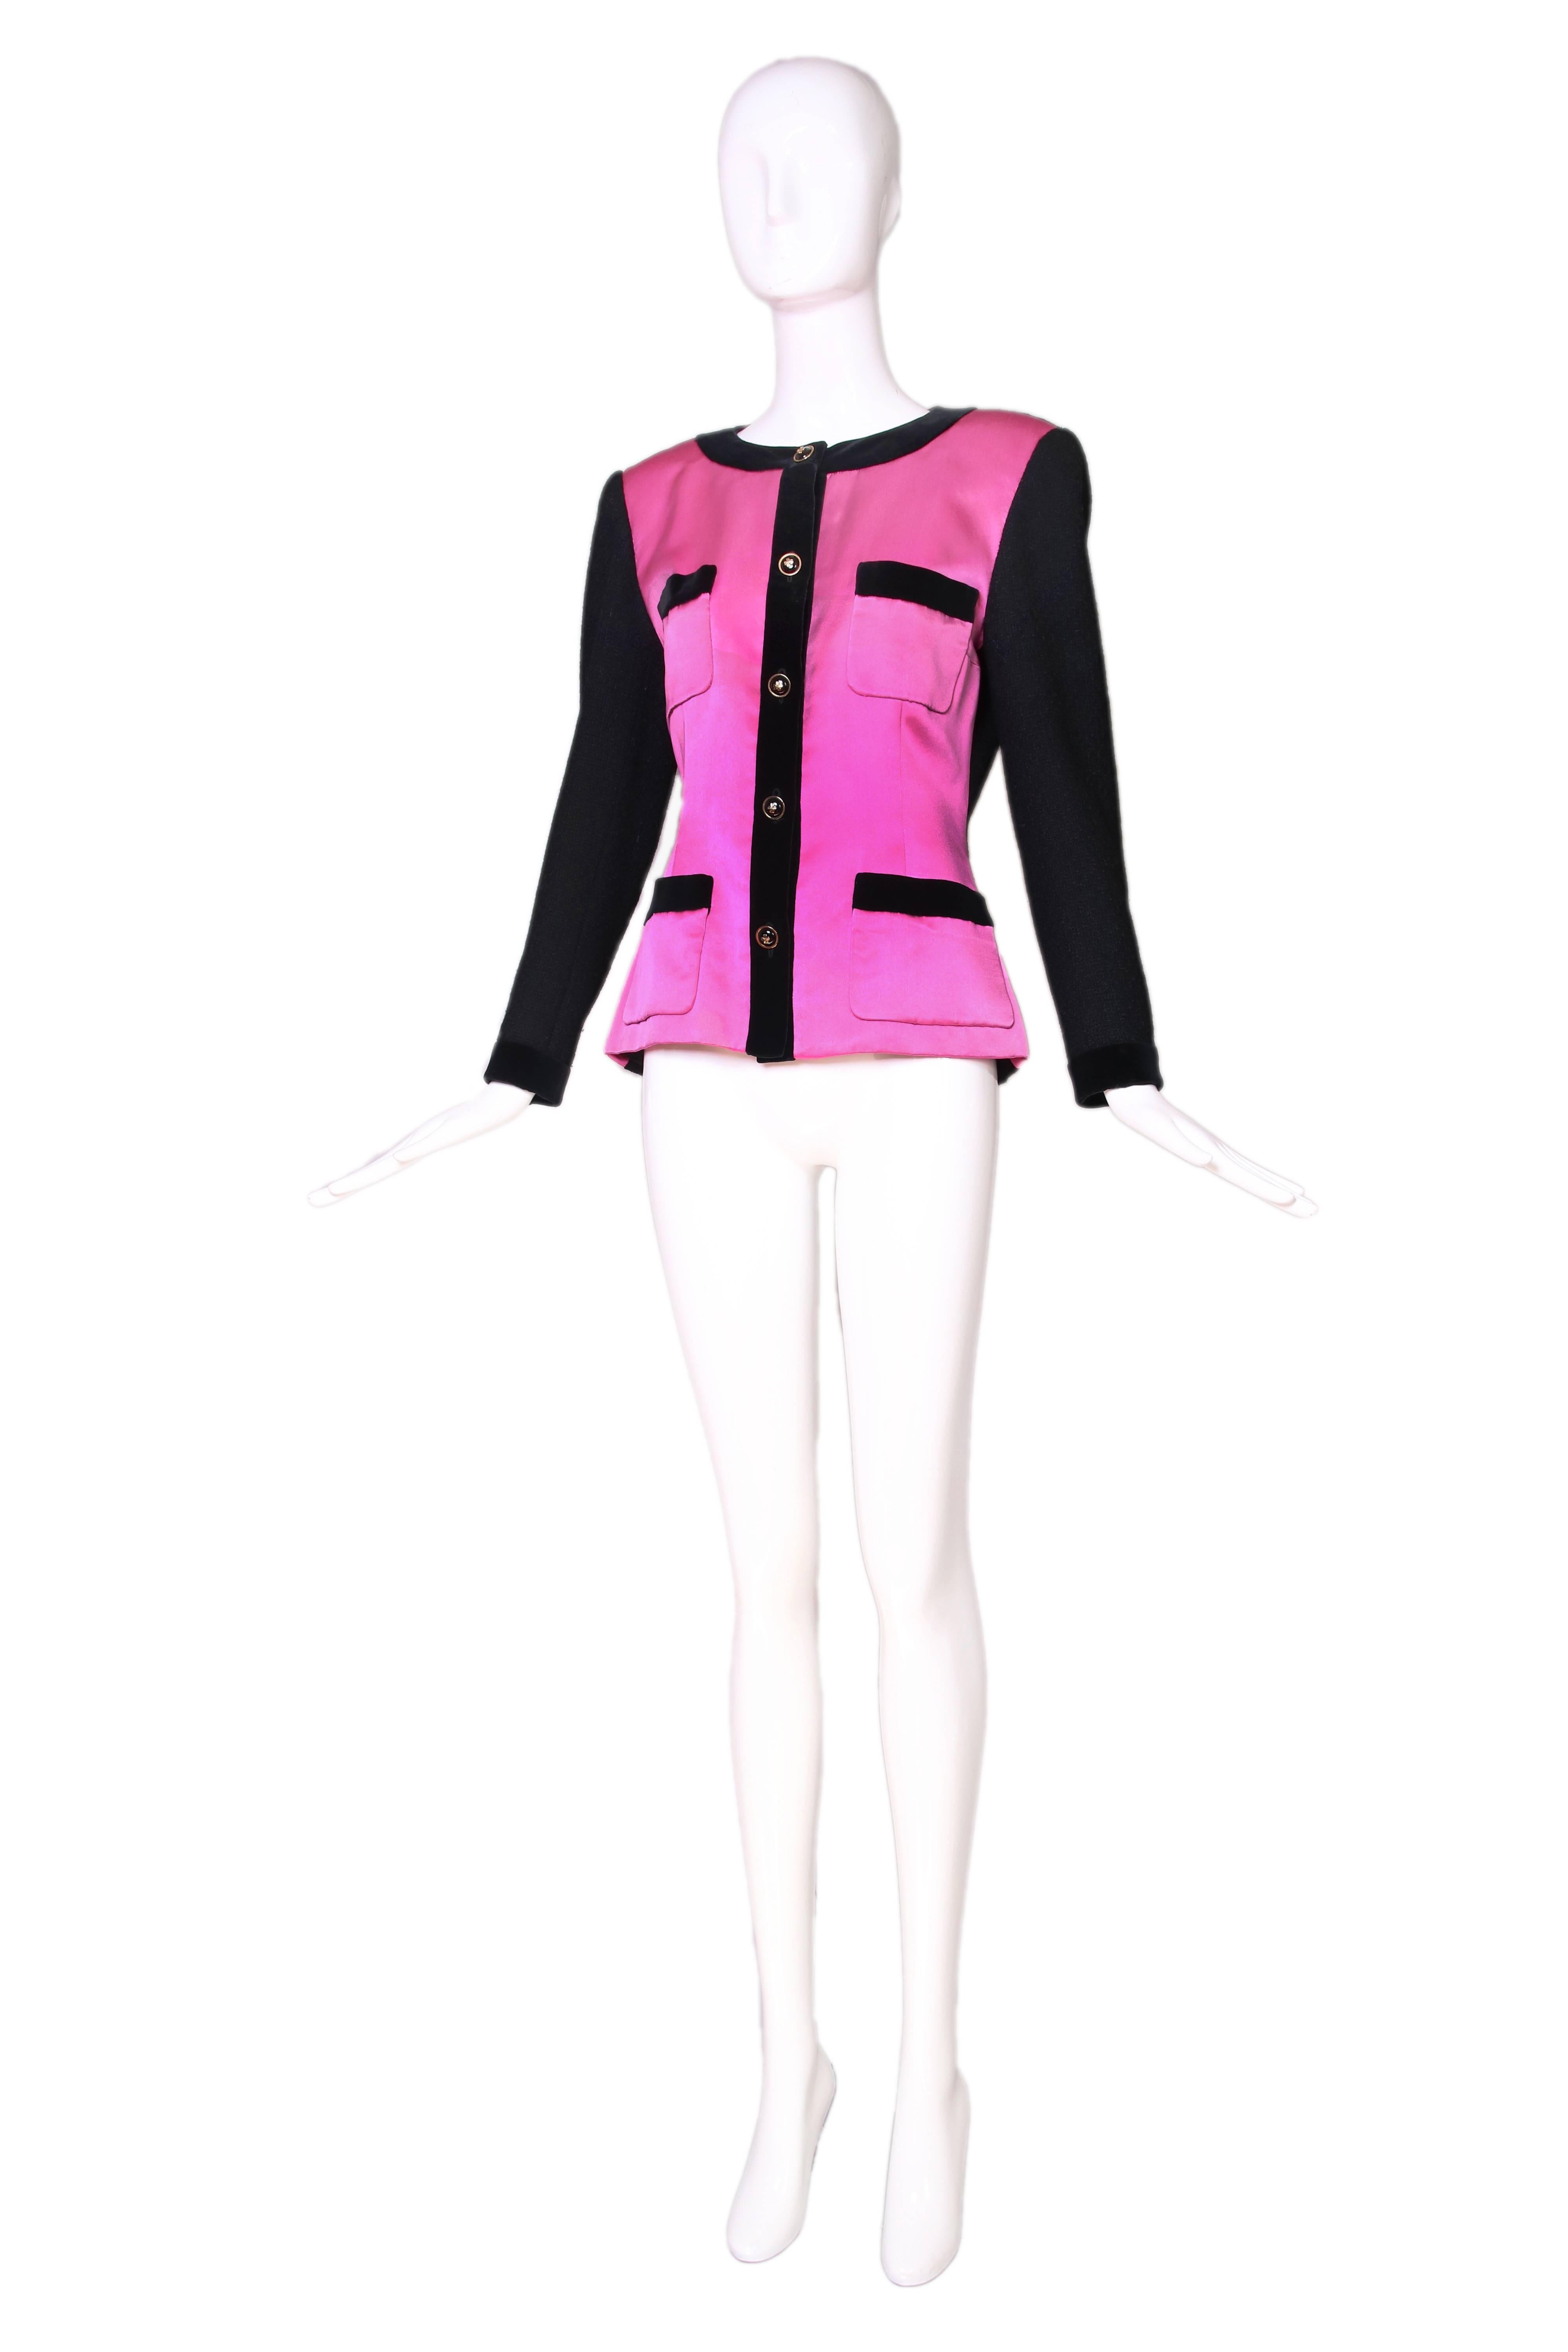 1987 A/H Chanel pink satin and black wool boucle fitted jacket with Four-leaf clover motif button closures at  center front and sleeve cuffs. Jacket is trimmed with black velvet at the neckline, placket, sleeve cuffs and at the top of the four